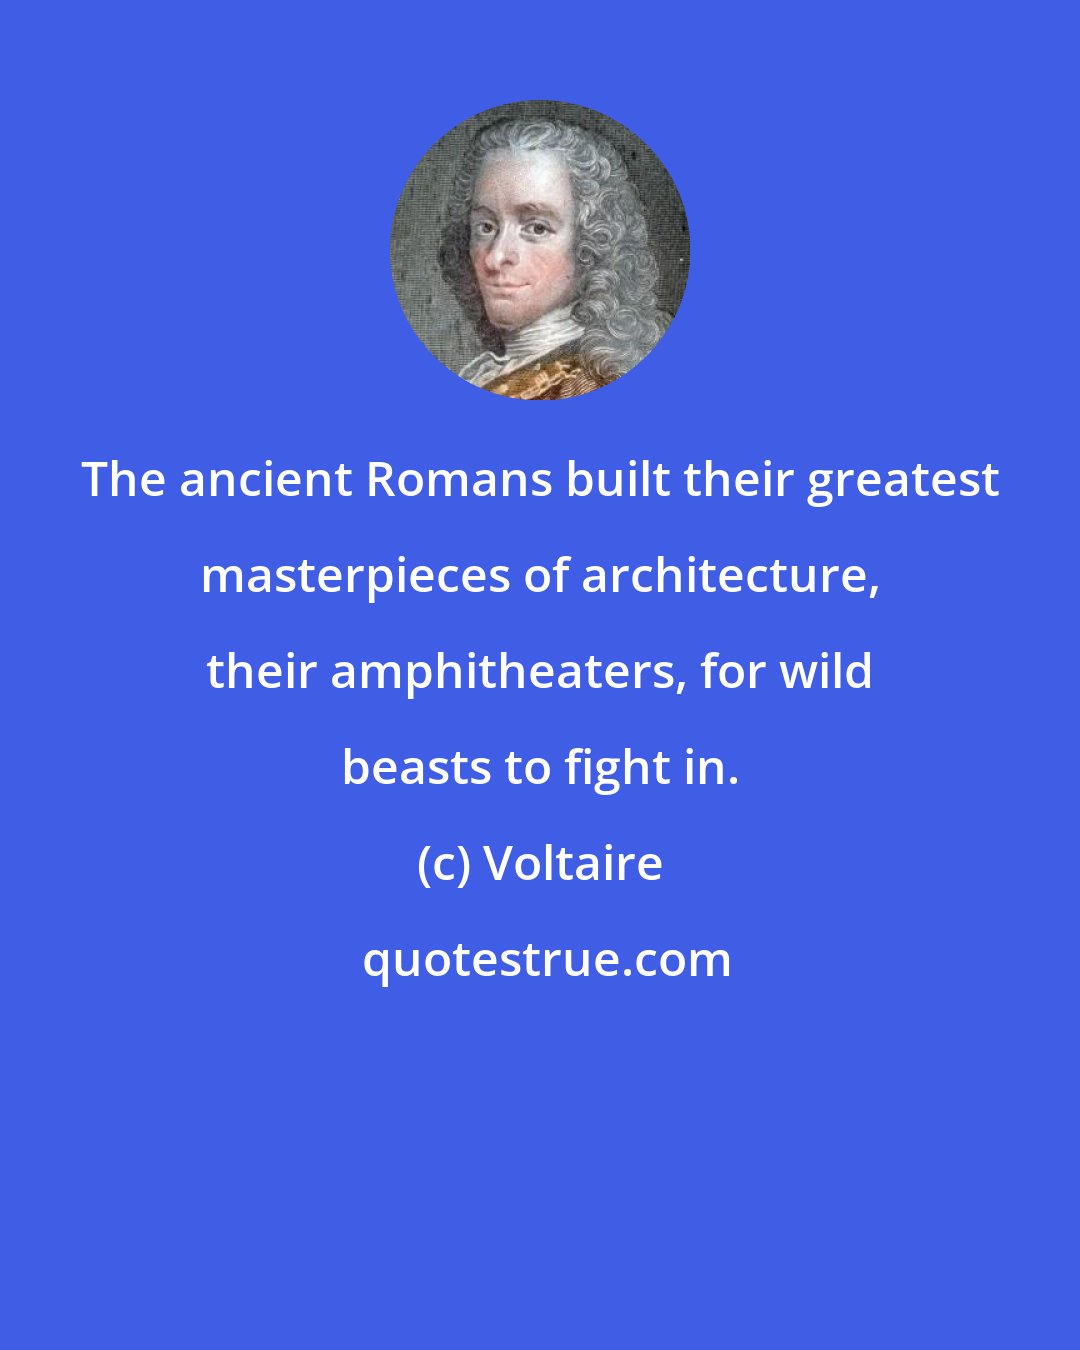 Voltaire: The ancient Romans built their greatest masterpieces of architecture, their amphitheaters, for wild beasts to fight in.